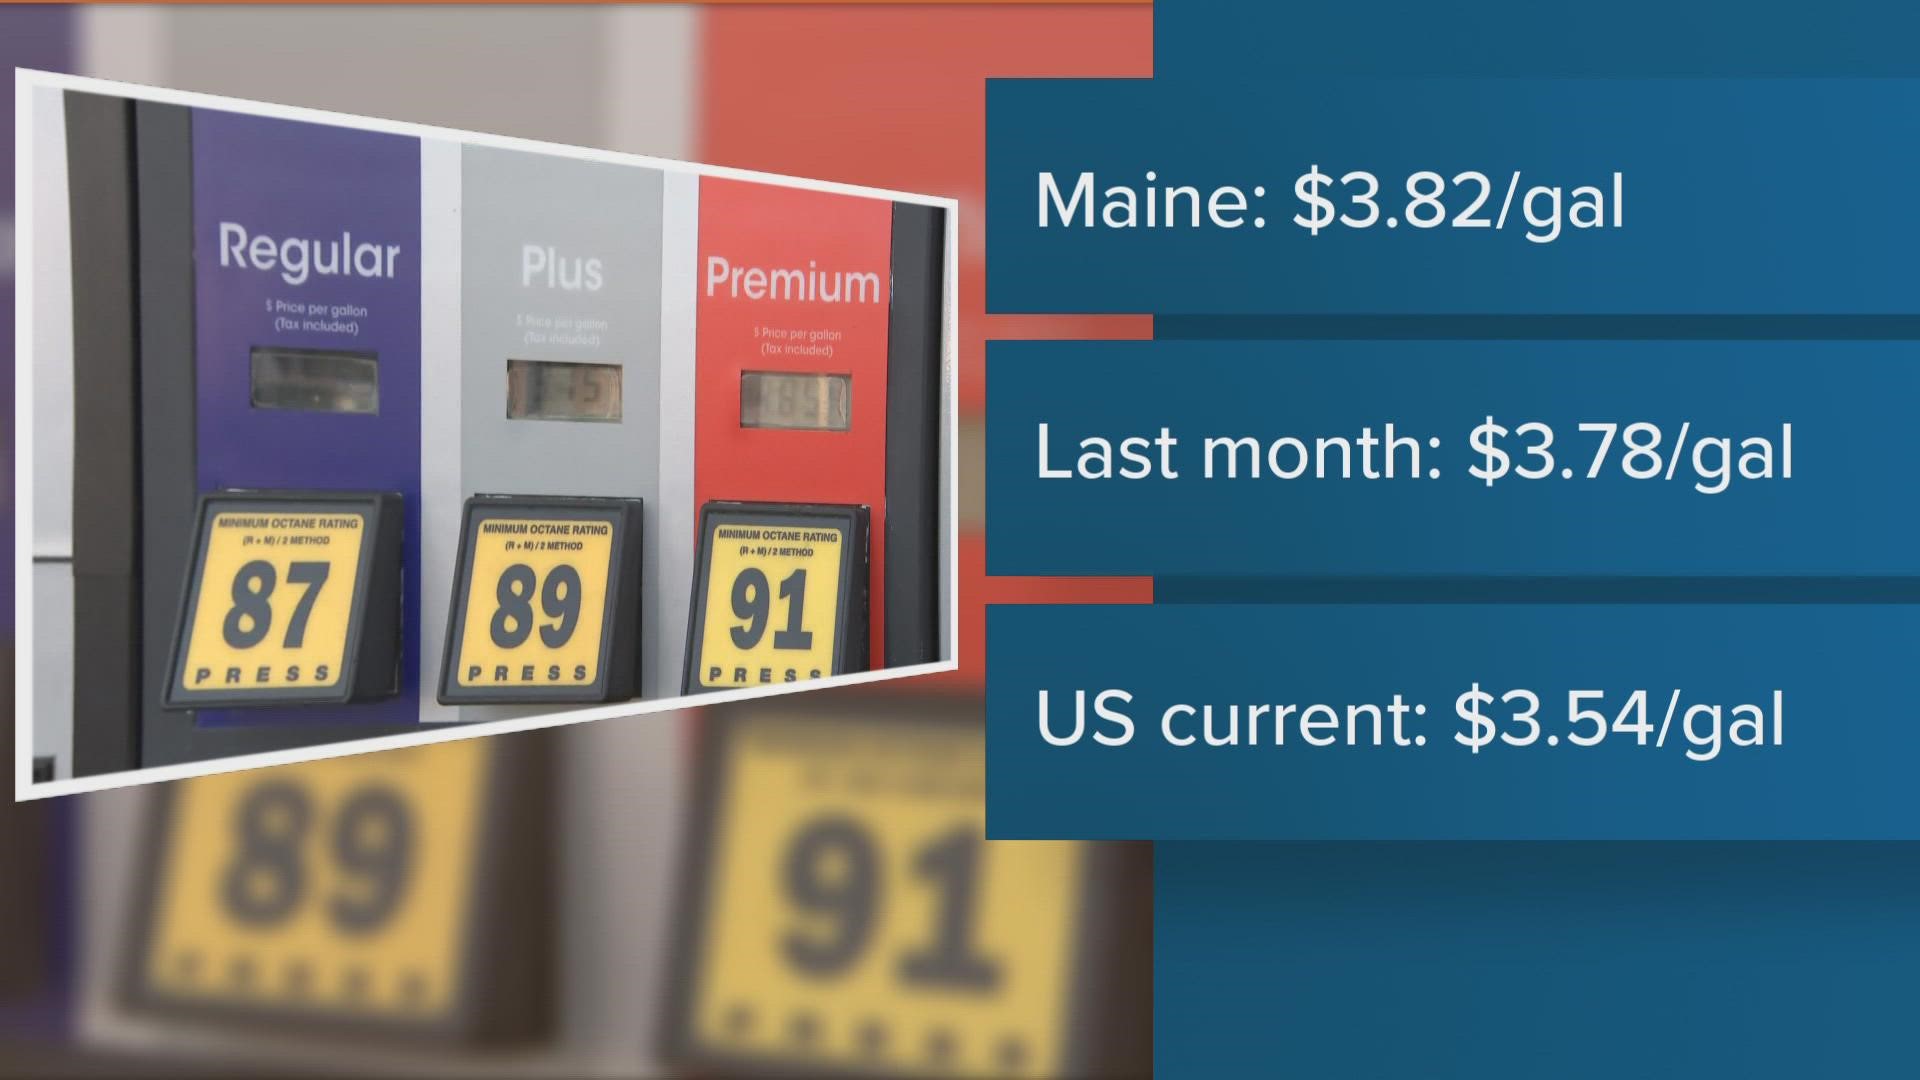 The average cost for a regular gallon of gas in Maine is $3.82, 28 cents higher than the national average.